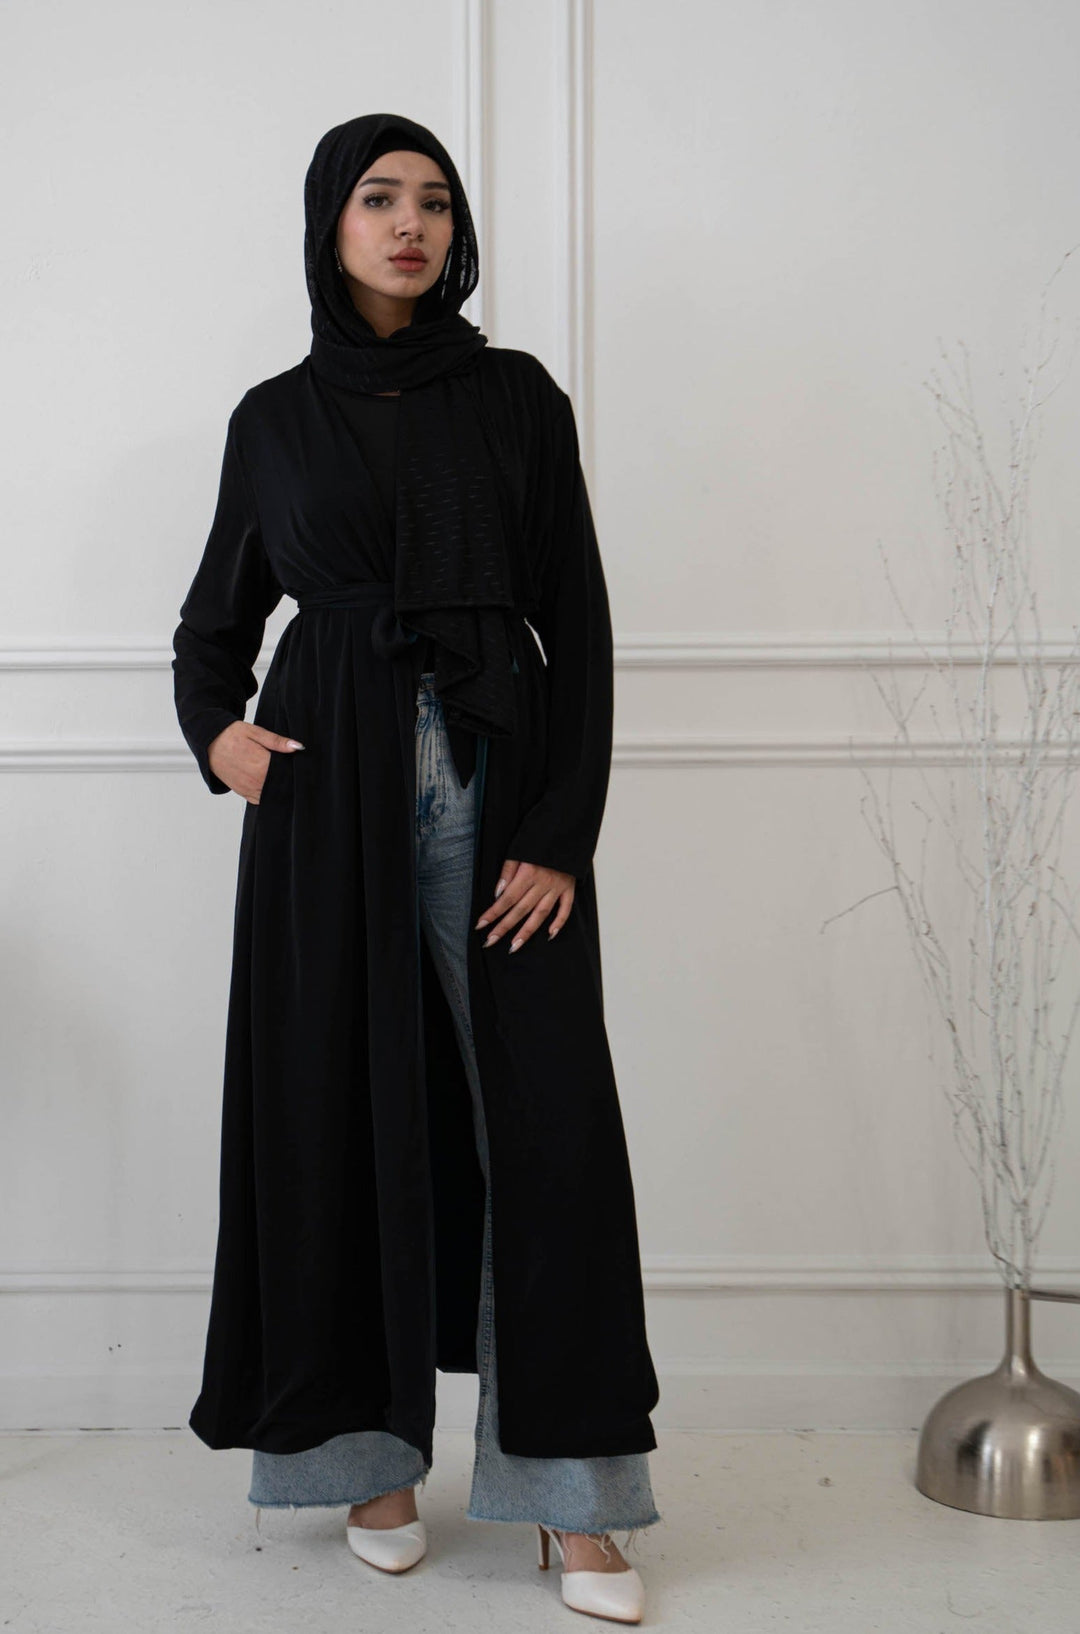 a woman standing in a room wearing a long black coat